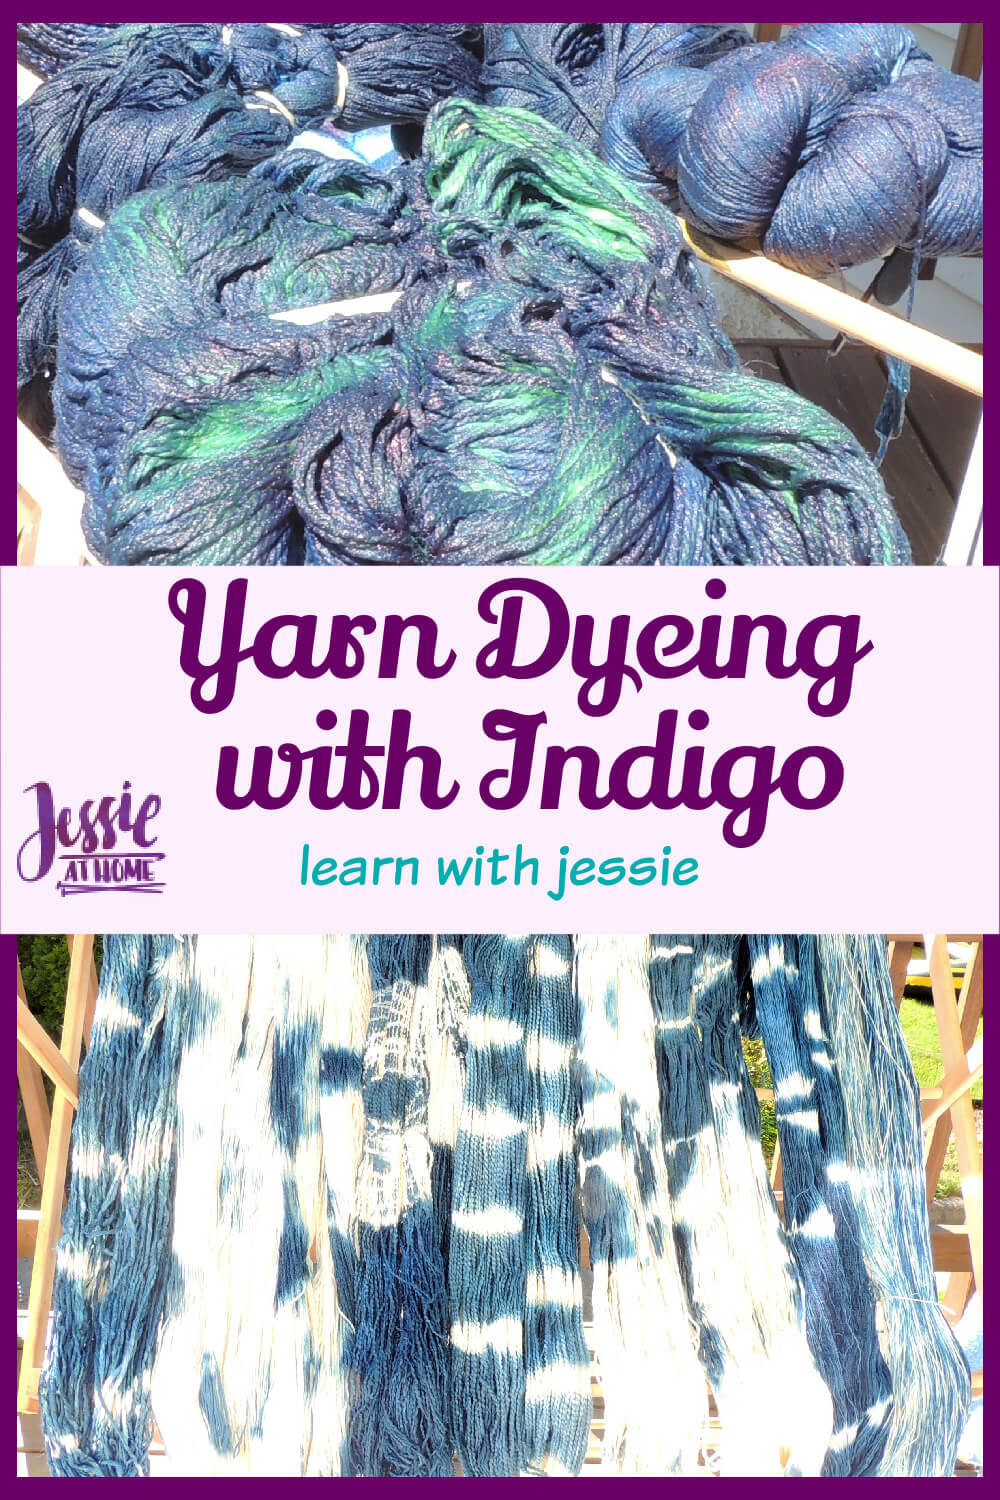 Yarn Dyeing with Indigo - This is so cool!